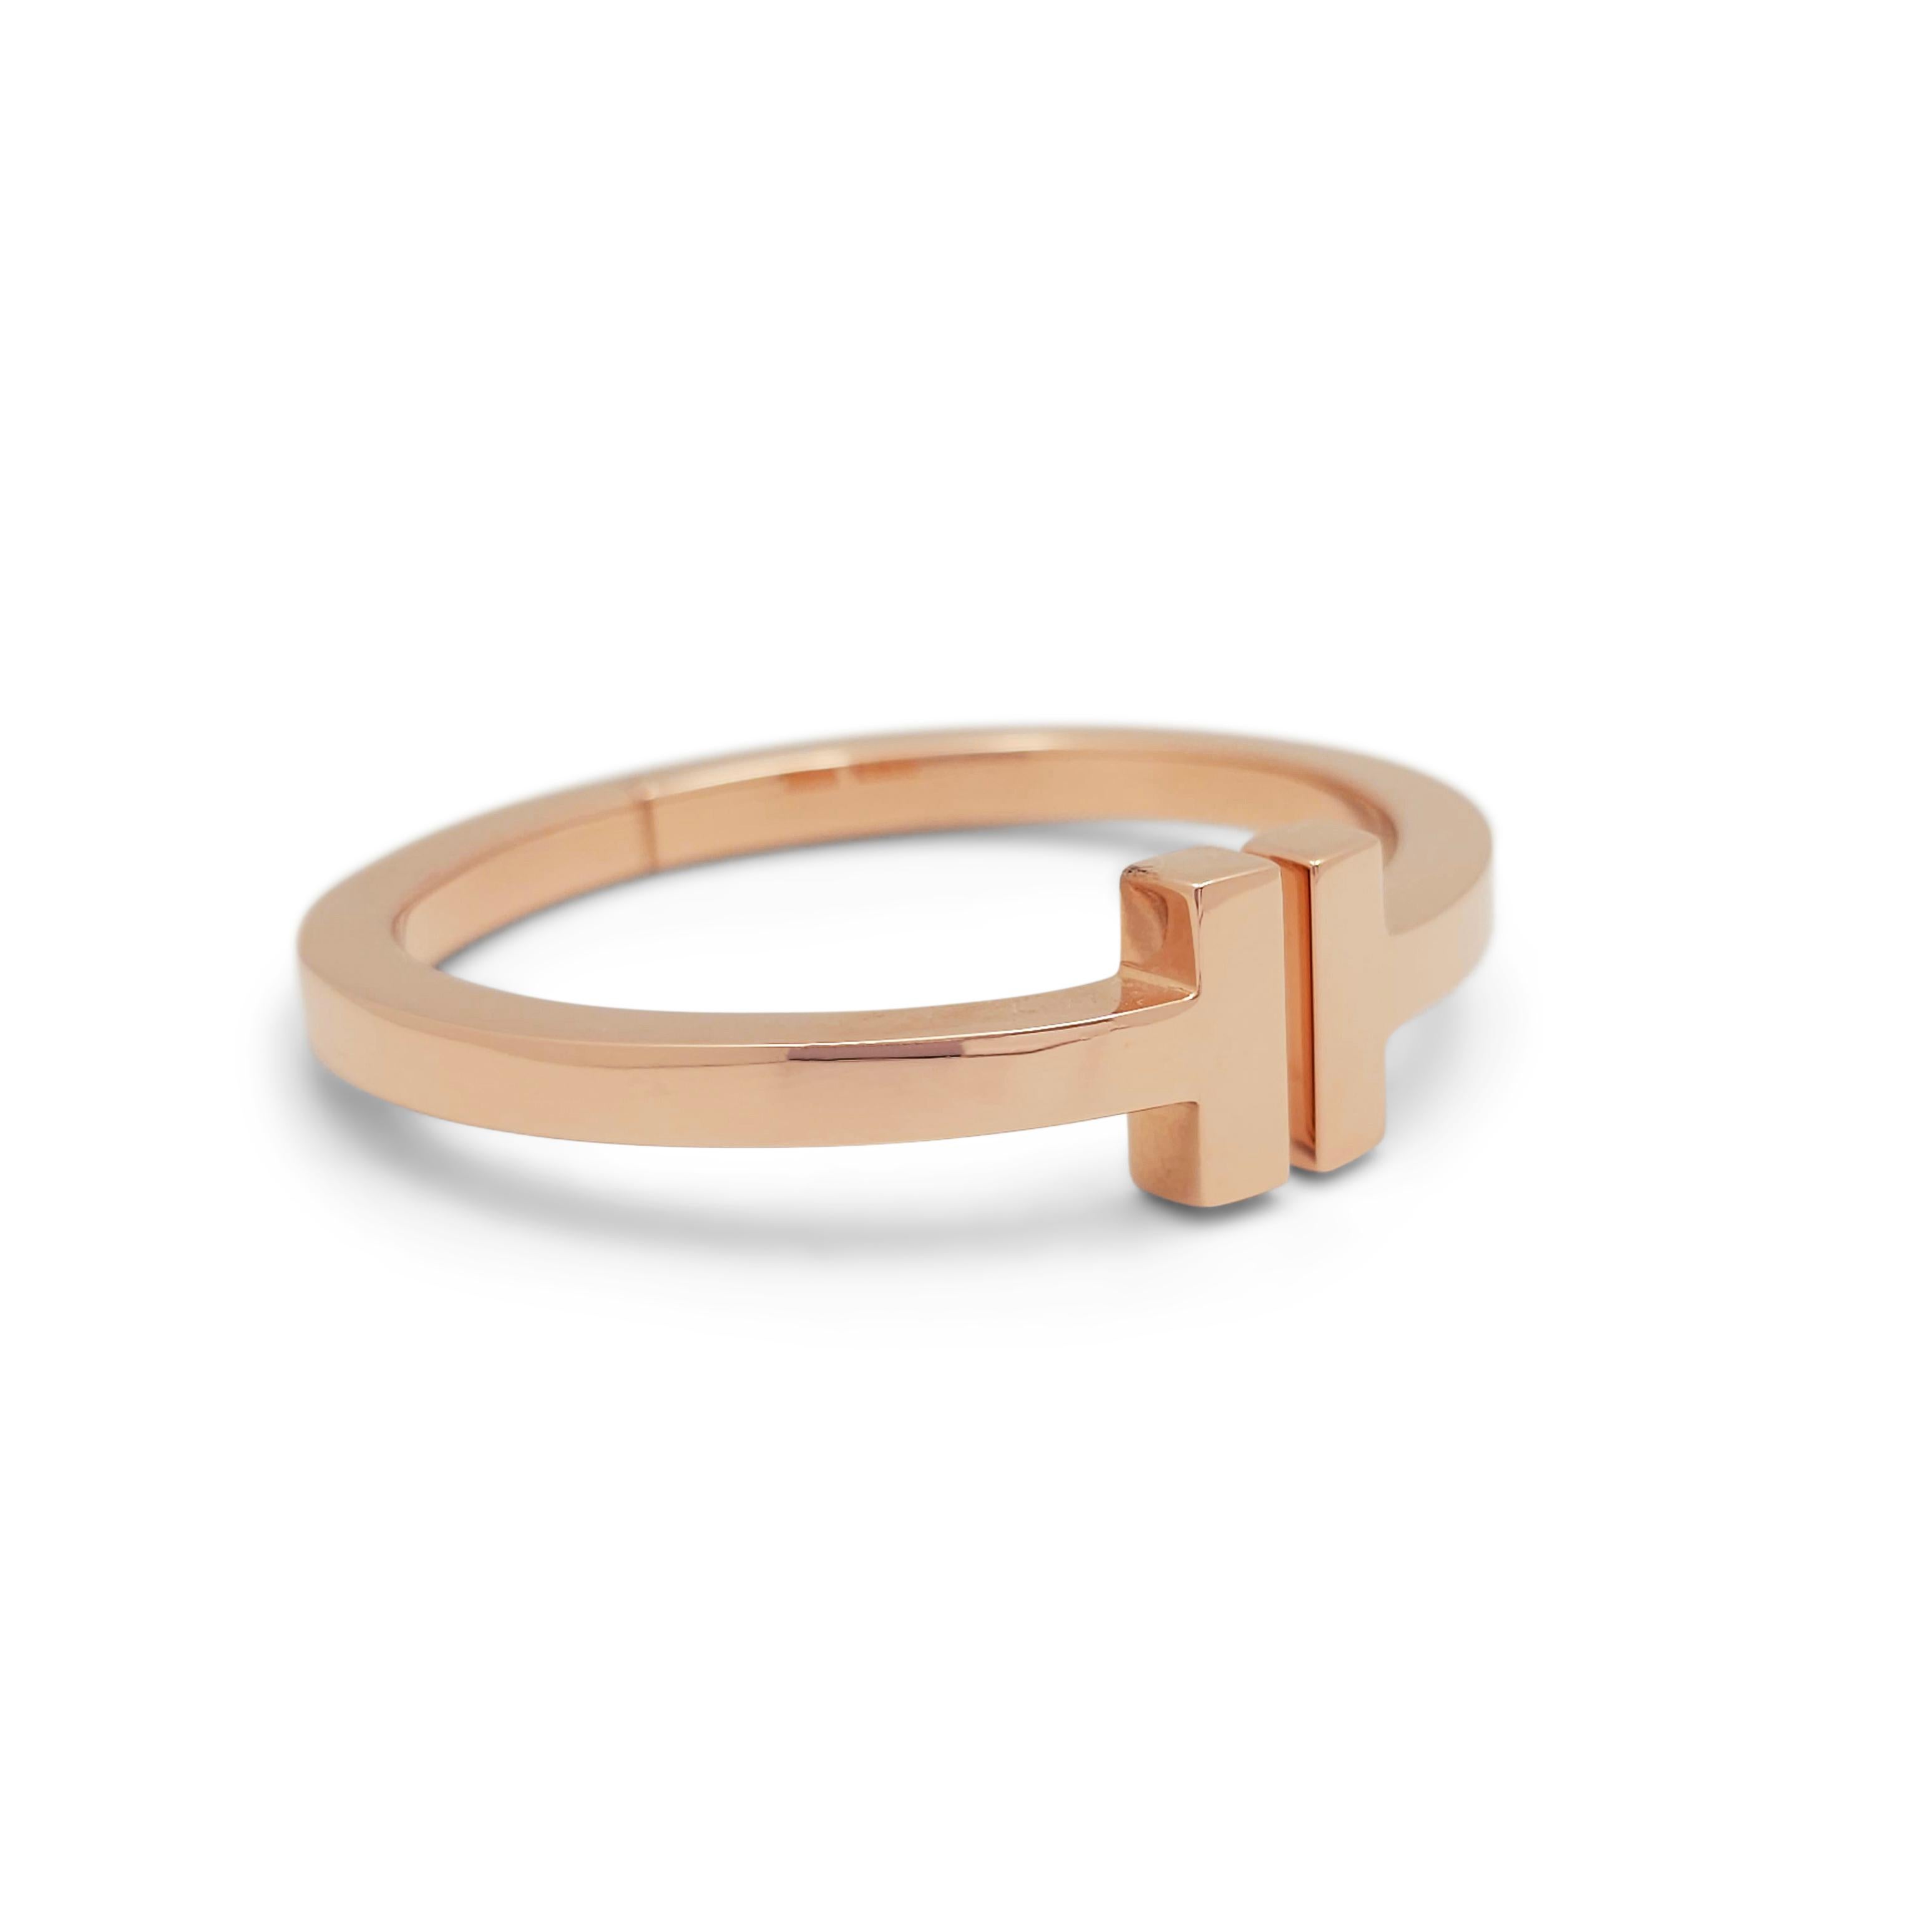 Authentic Tiffany T square bracelet crafted in 18 karat rose gold.  Each end of the split bangle is finished with the TIffany T motif.  Size extra small, will fit up to a 5 1/4 inch wrist.  Signed Tiffany & Co., Au 750, Italy.  Bracelet is presented